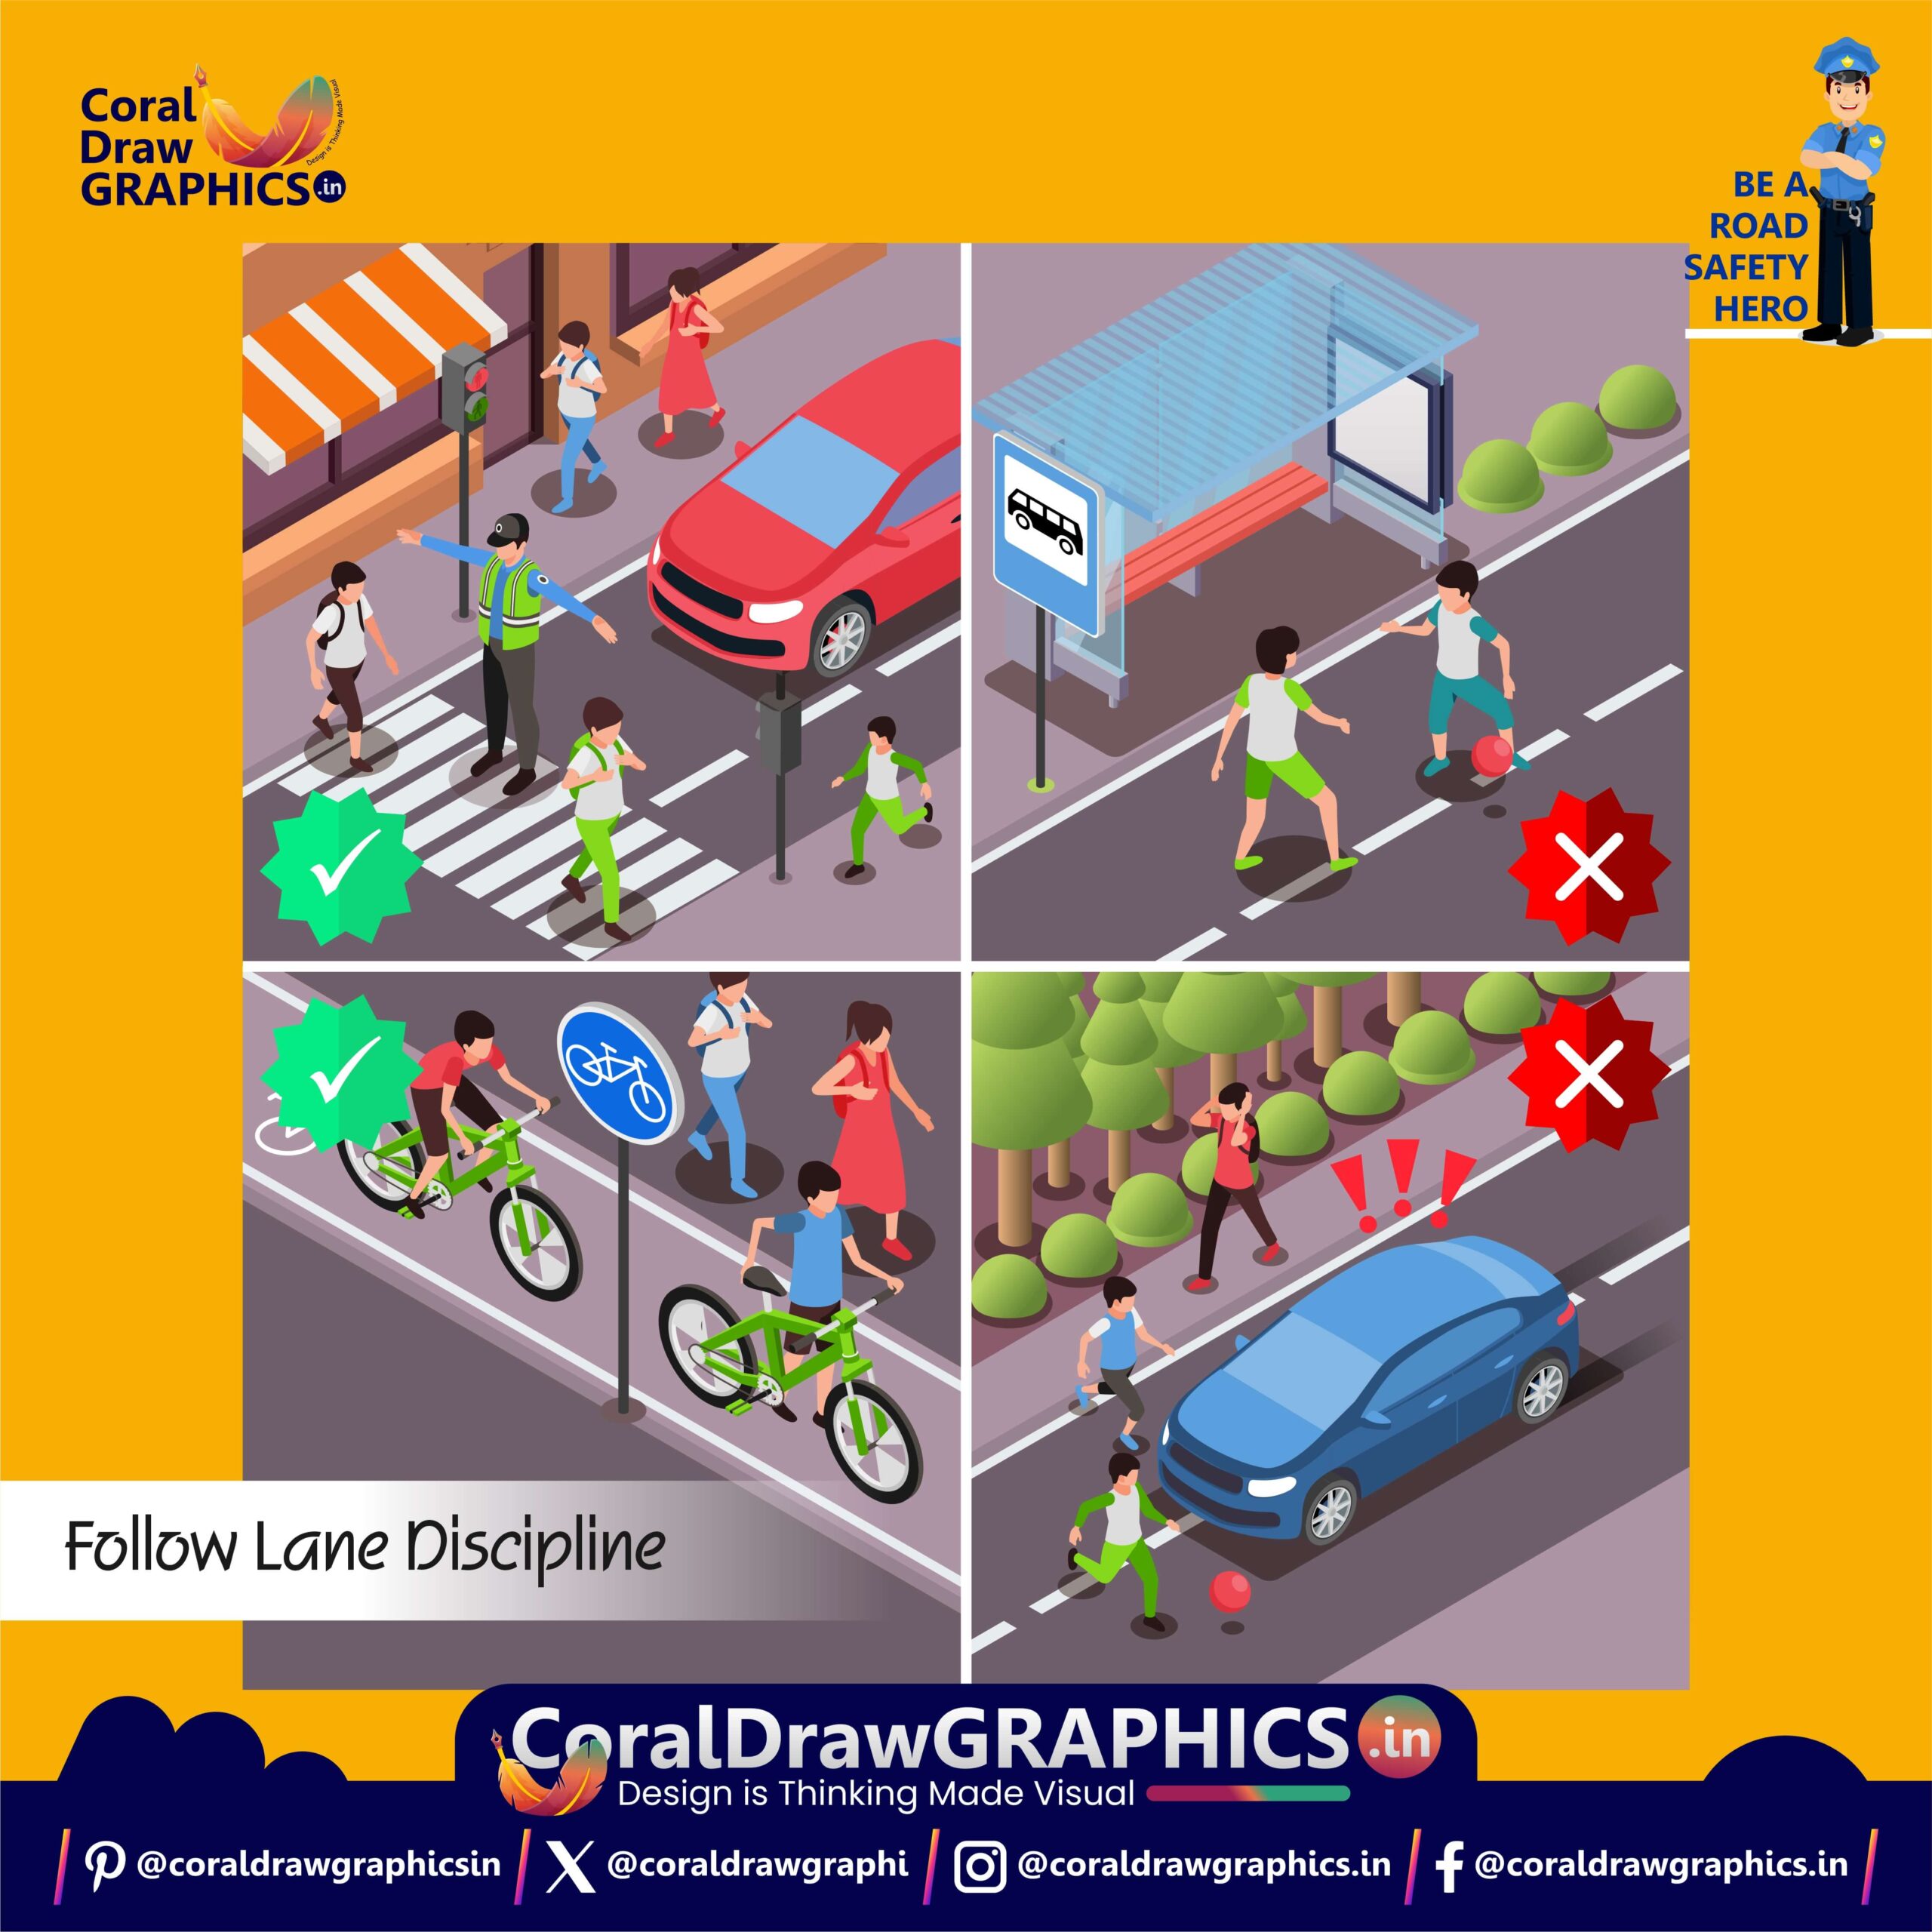 Day-2 Traffic Week Rules & Message